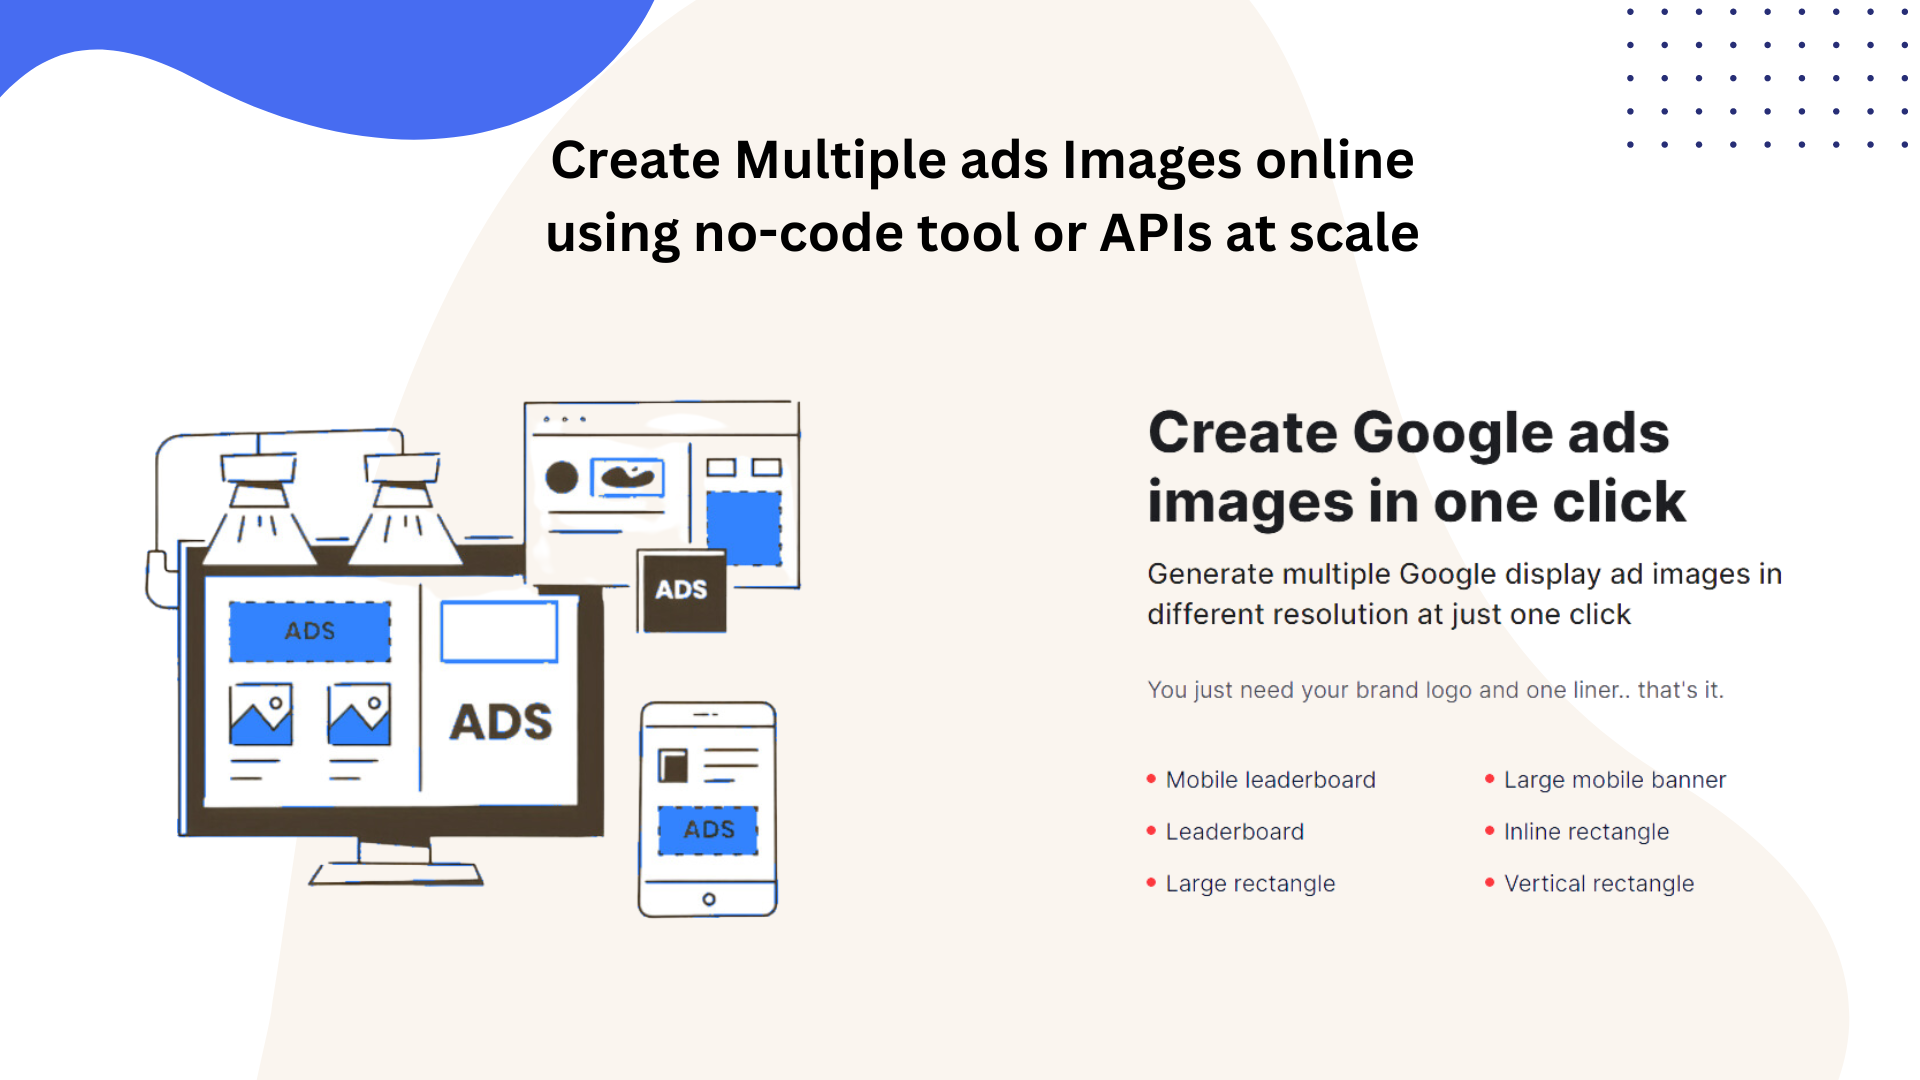 In a single click, you can generate multiple Google display ad images.